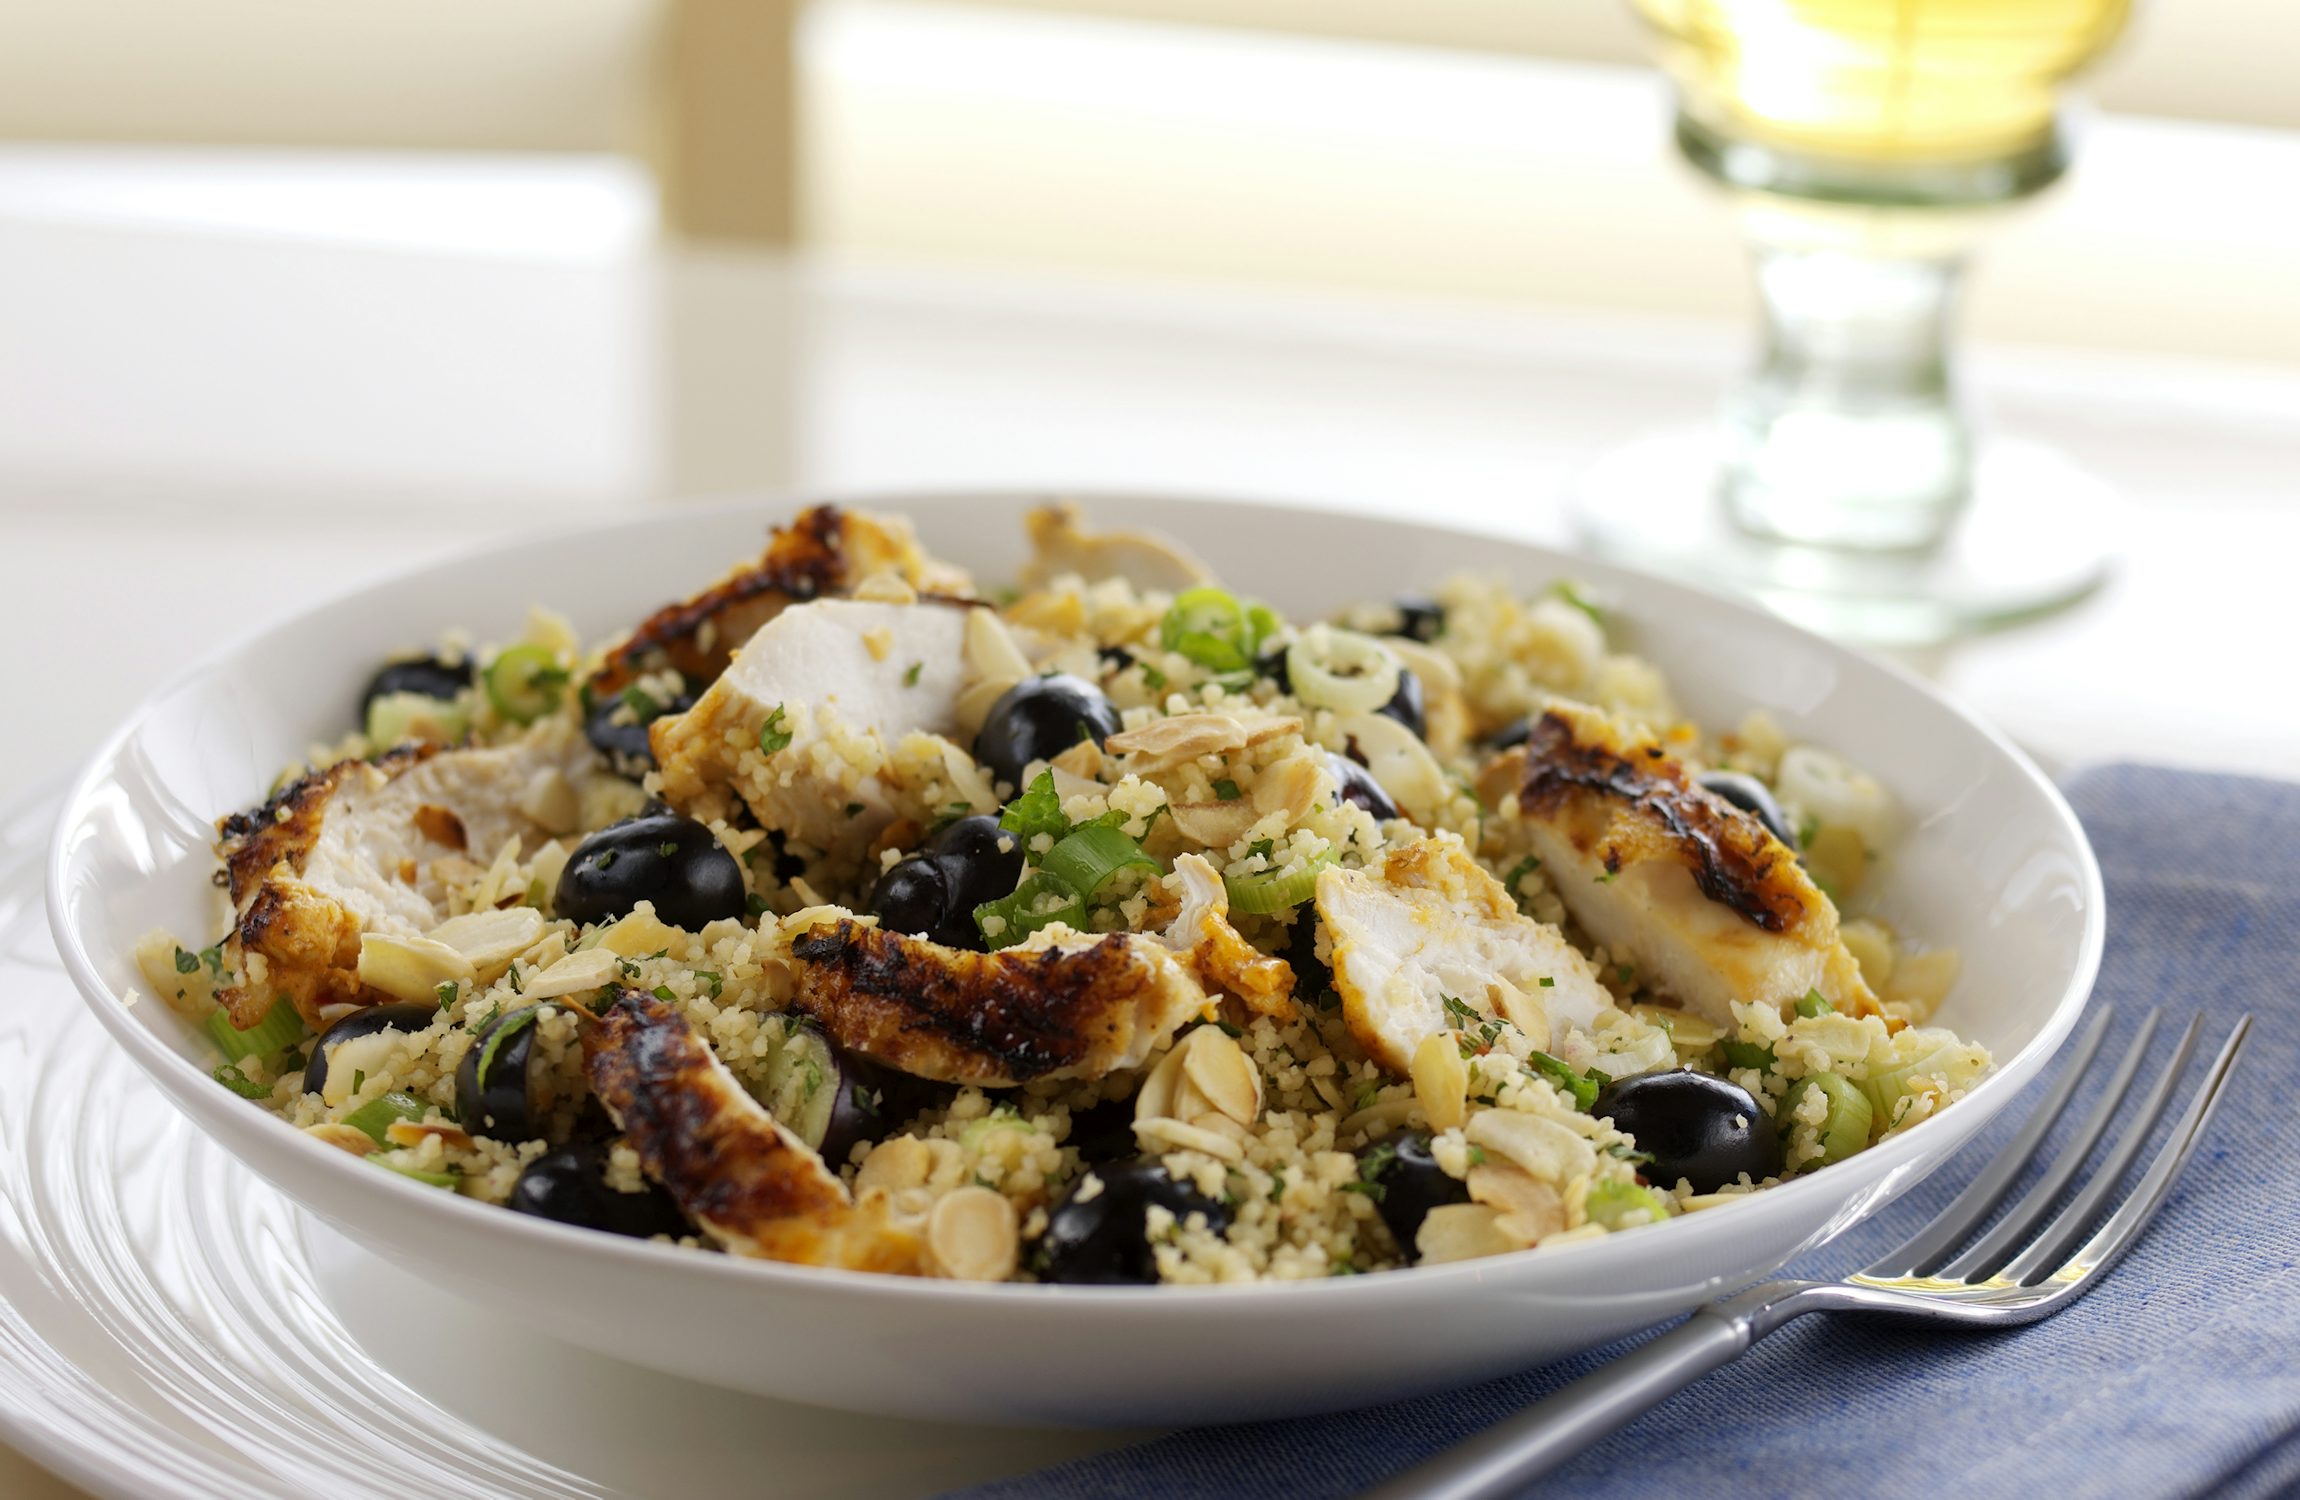 Marinated Chicken & Minted Blueberry Couscous Salad